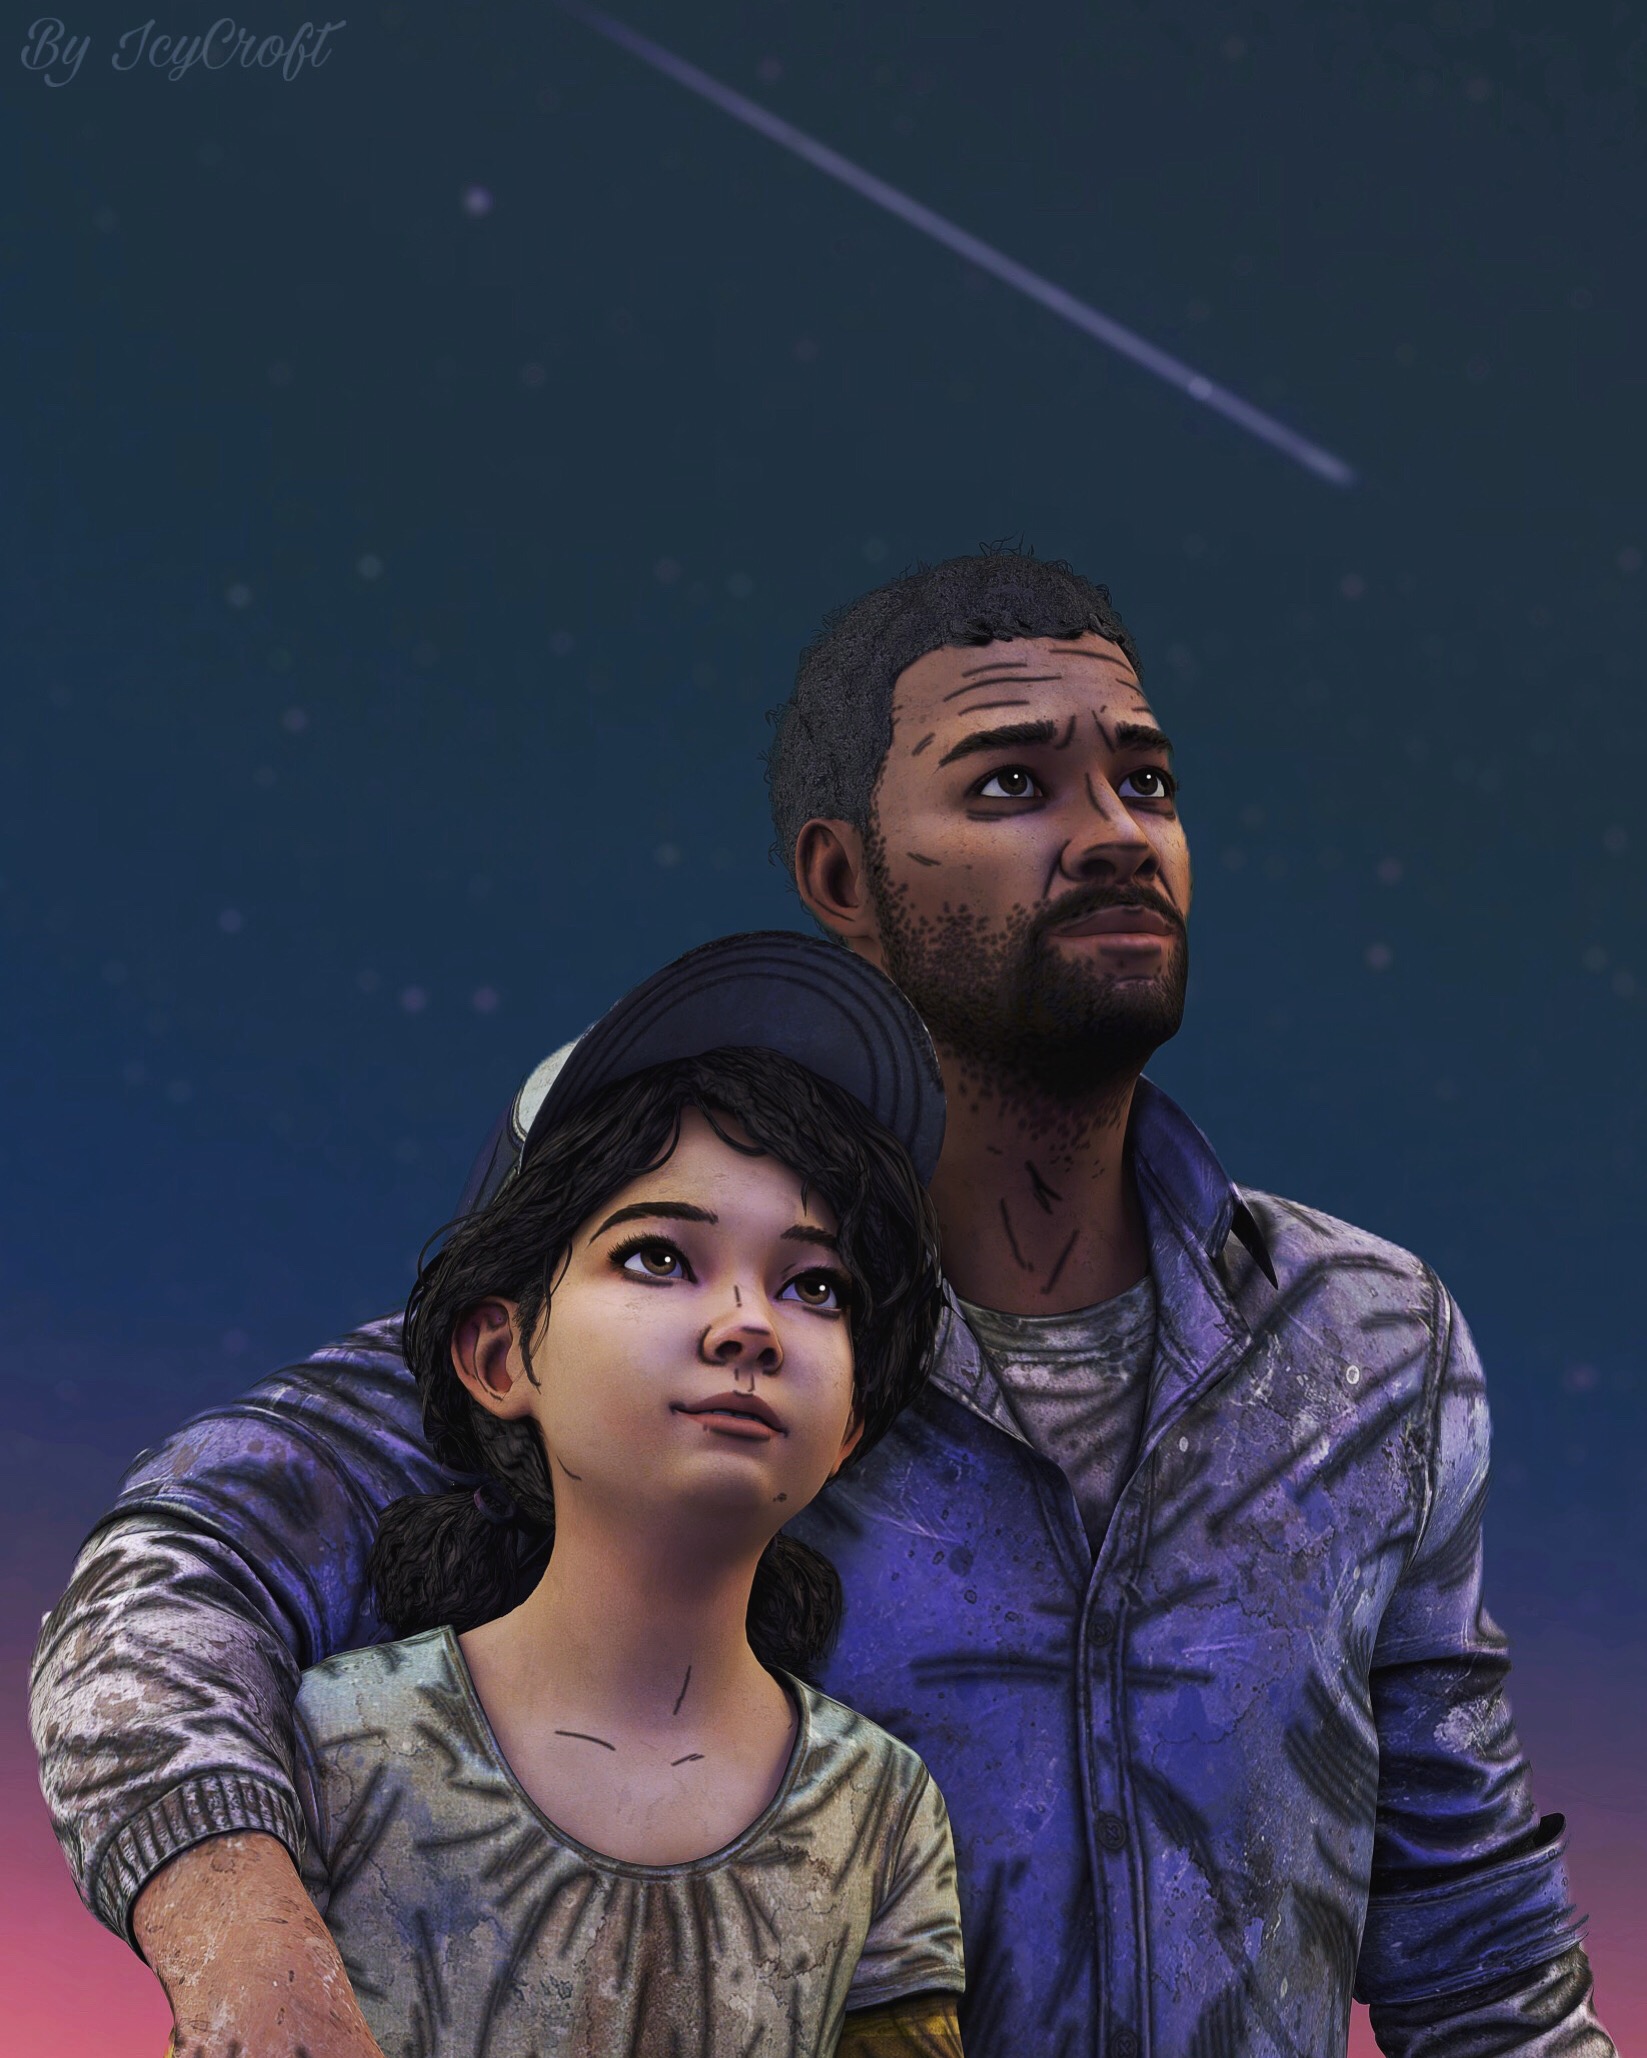 The Walking Dead Final Season Lee and Clementine by ICYCROFT on DeviantArt